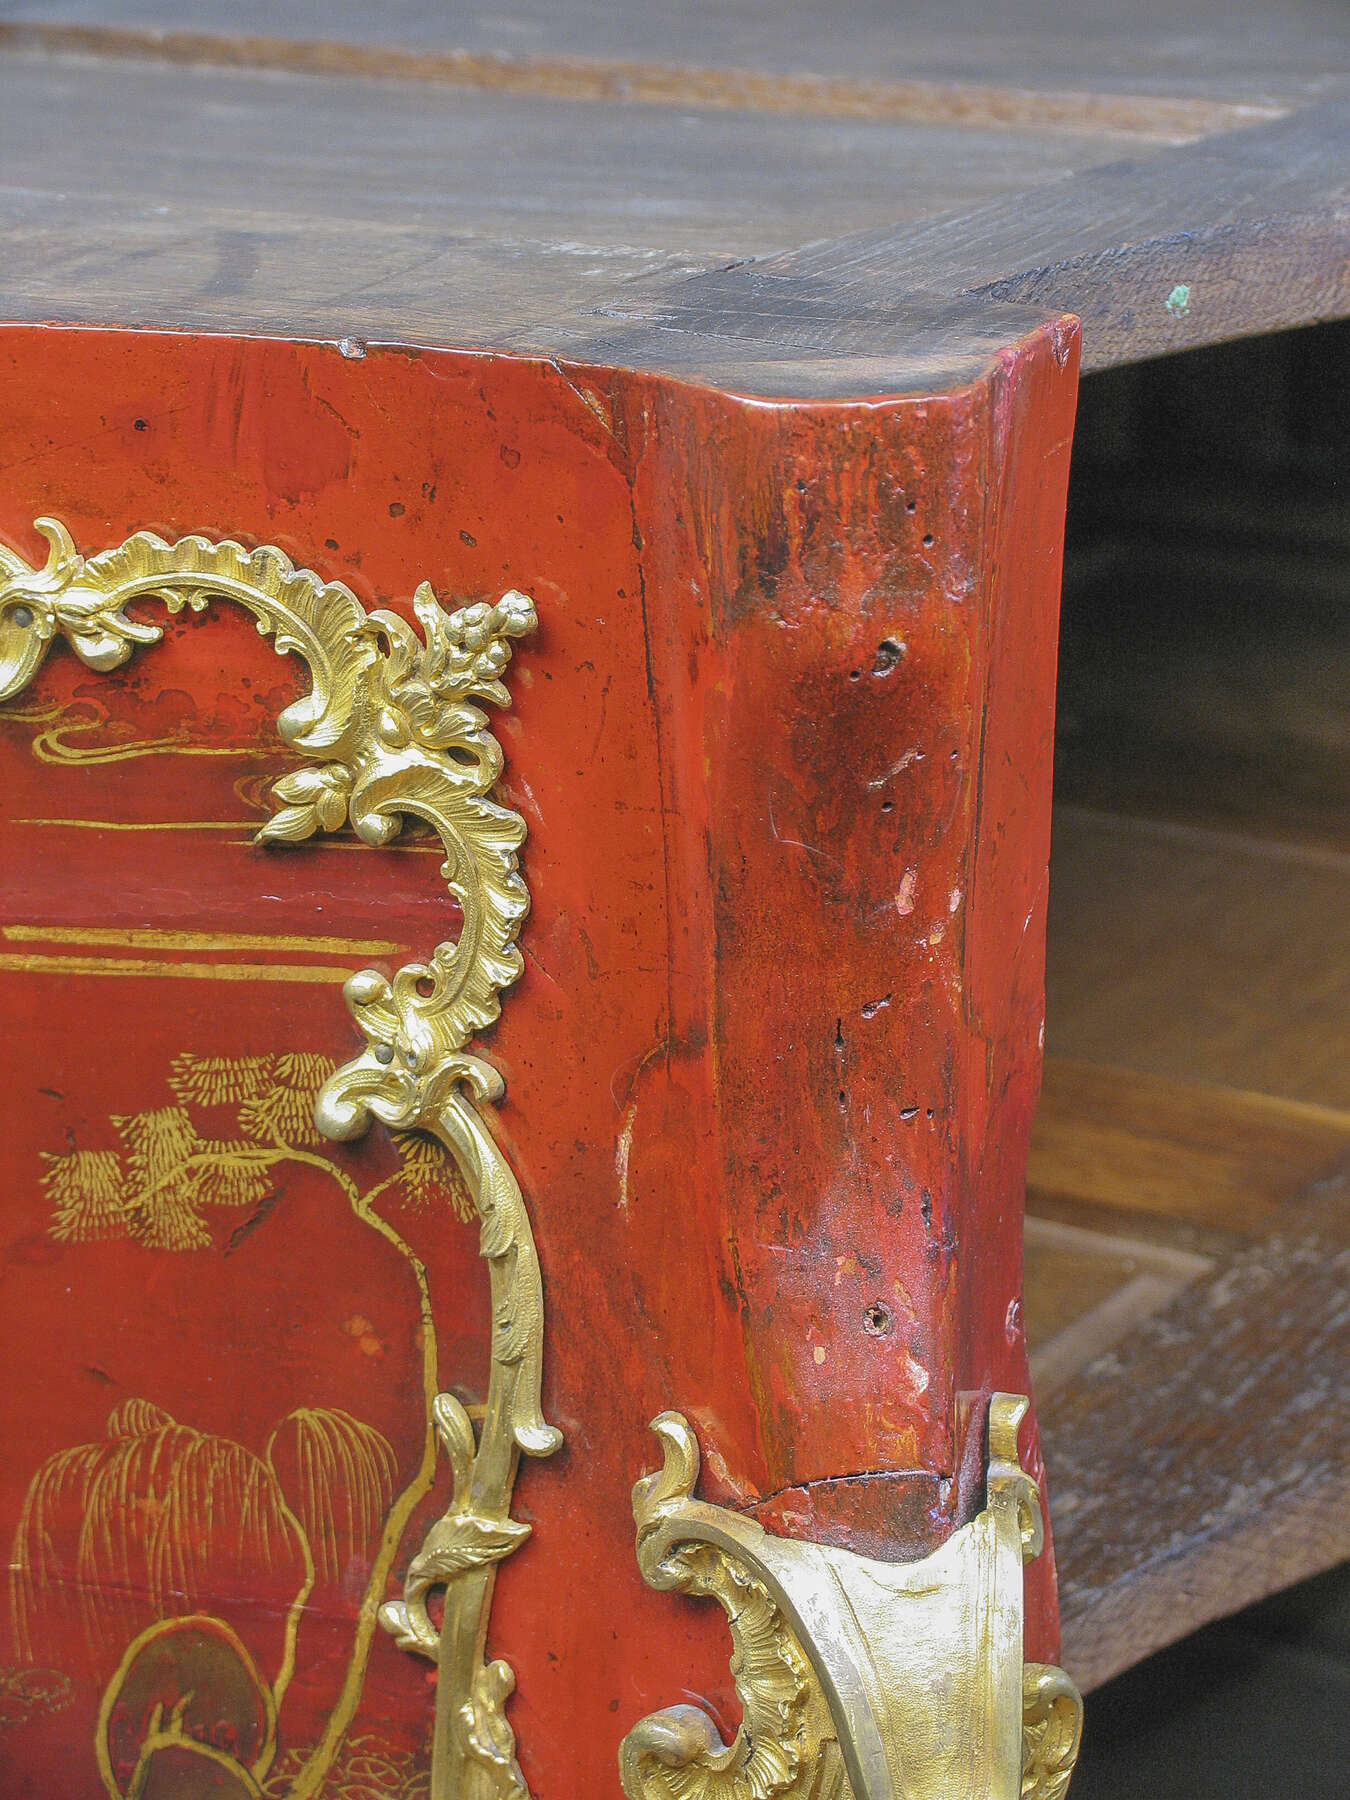 detail of one of the commode’s corners, with a horizontal strip of wood visible at the top of the bright reddish-orange leg